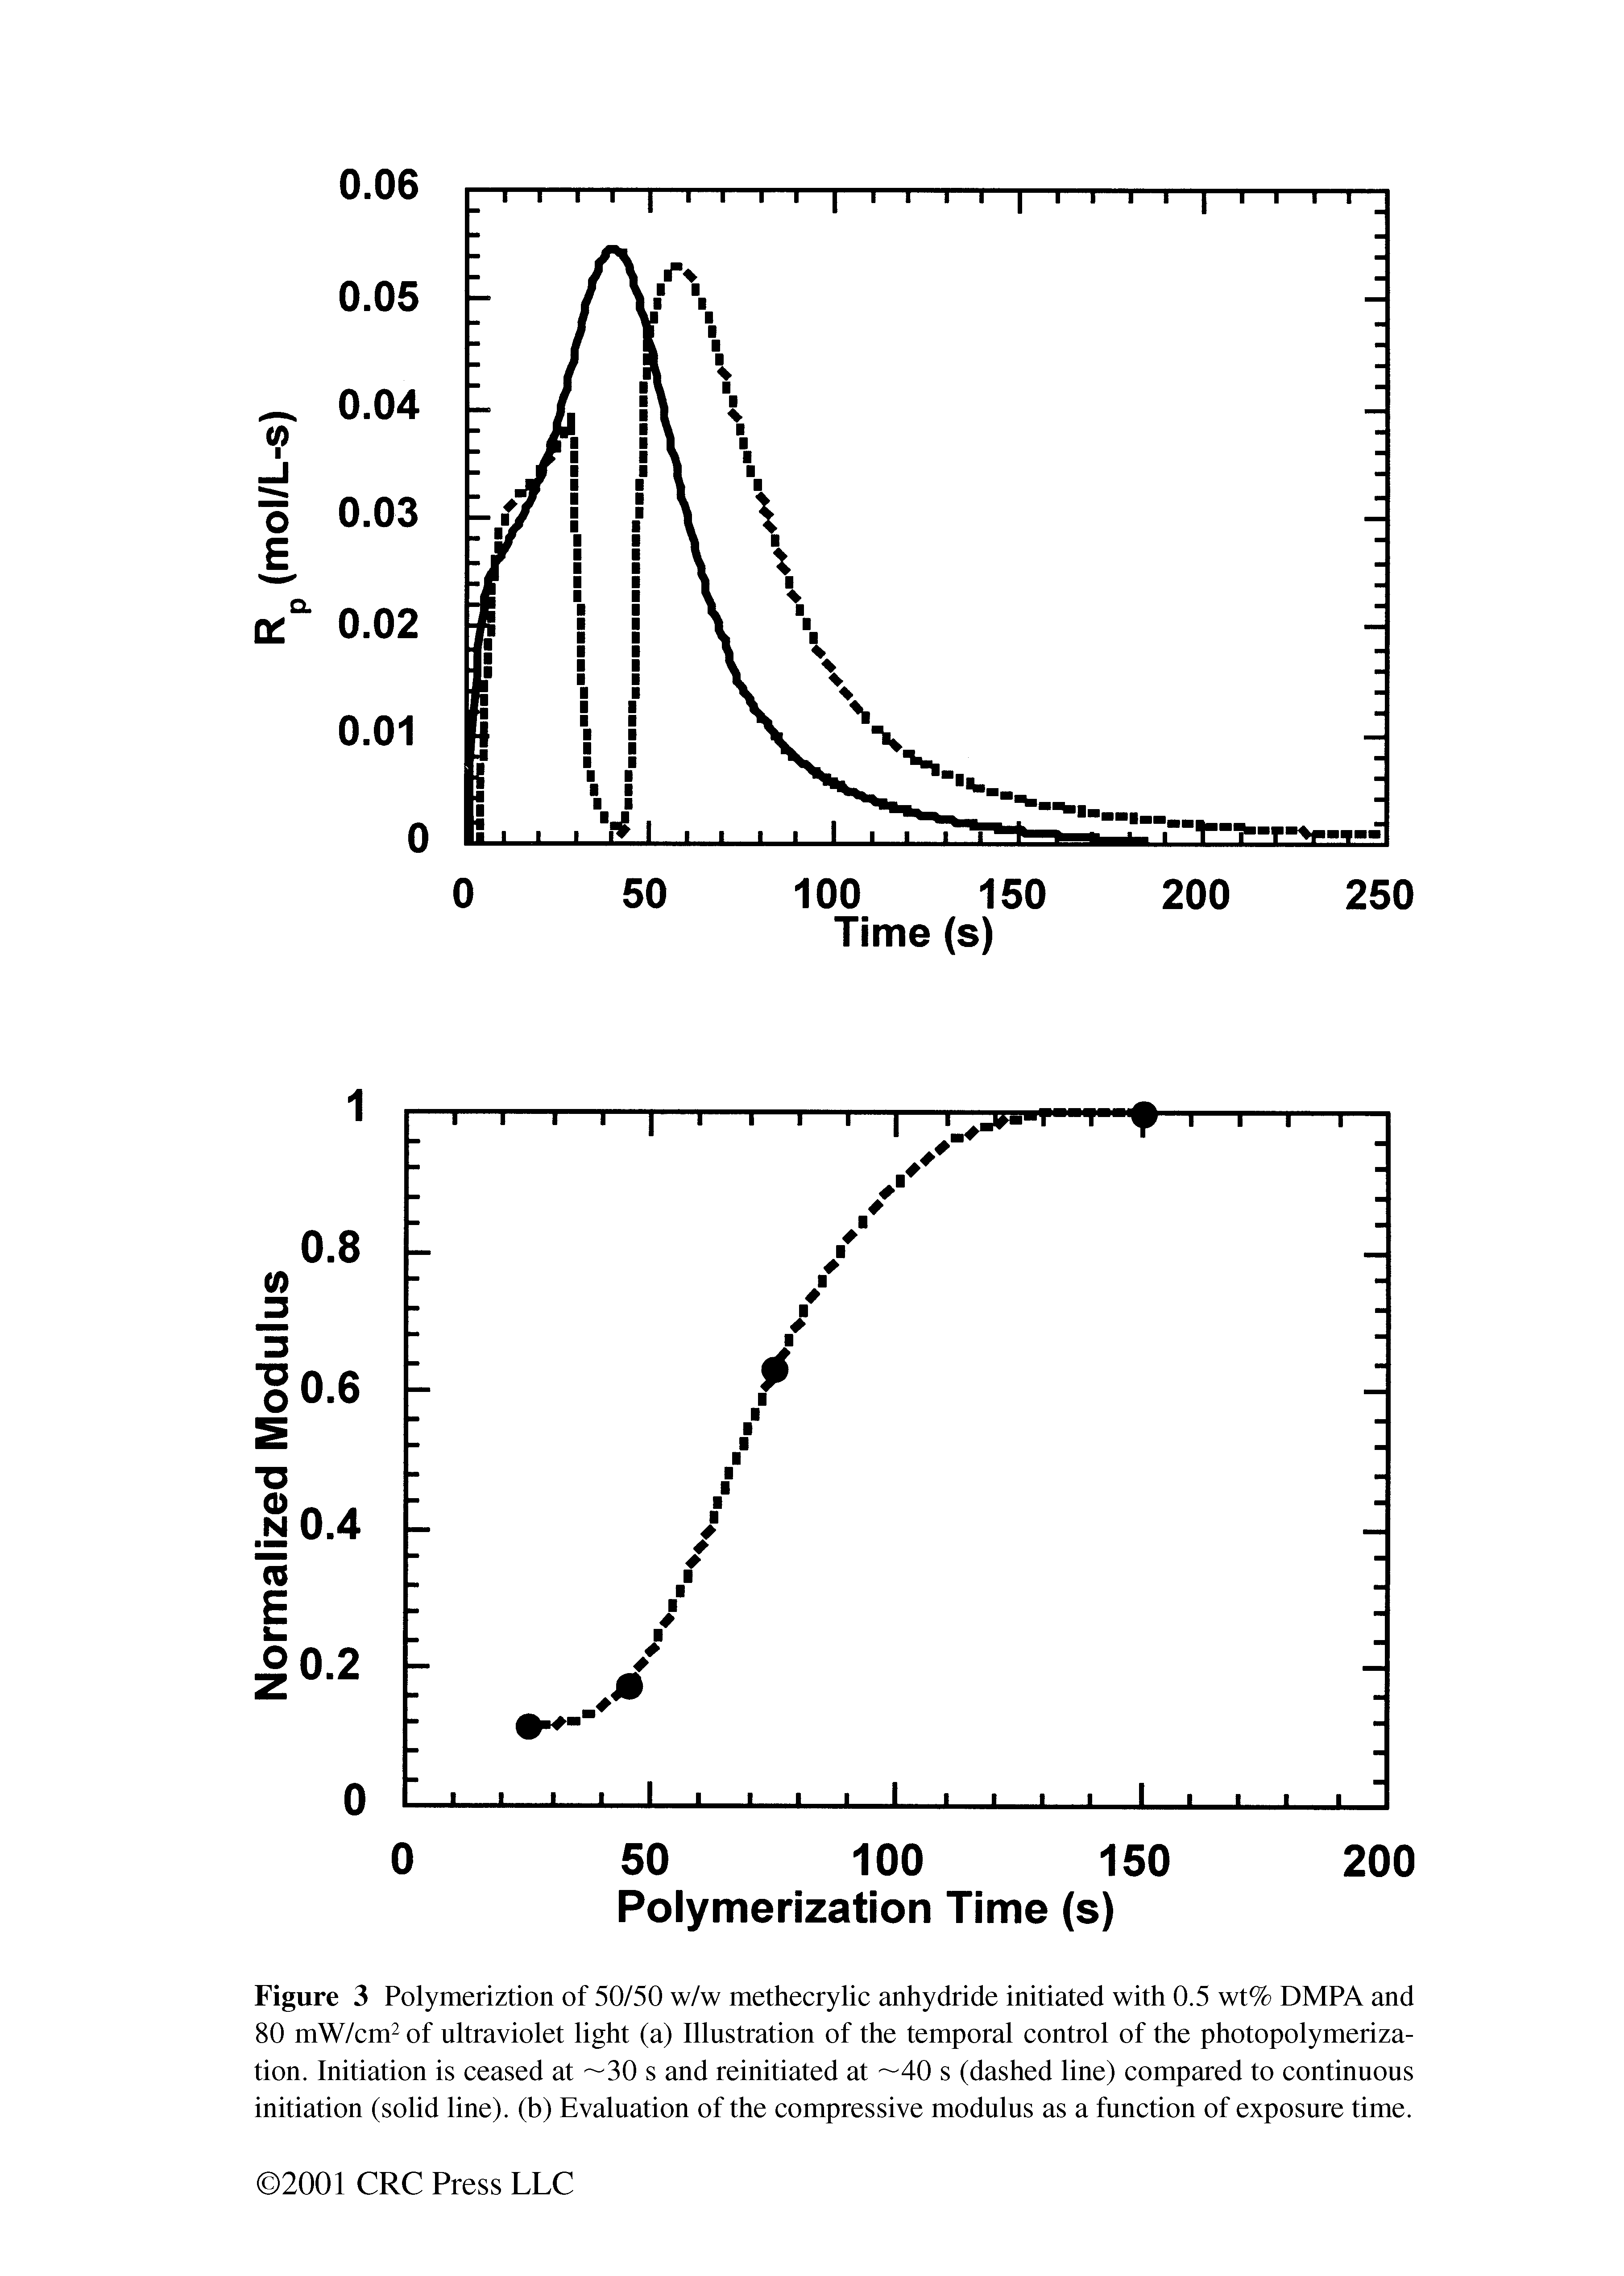 Figure 3 Polymeriztion of 50/50 w/w methecrylic anhydride initiated with 0.5 wt% DMPA and 80 mW/em of ultraviolet light (a) Illustration of the temporal eontrol of the photopolymerization. Initiation is eeased at —30 s and reinitiated at —40 s (dashed line) eompared to eontinuous initiation (solid line), (b) Evaluation of the eompressive modulus as a funetion of exposure time.